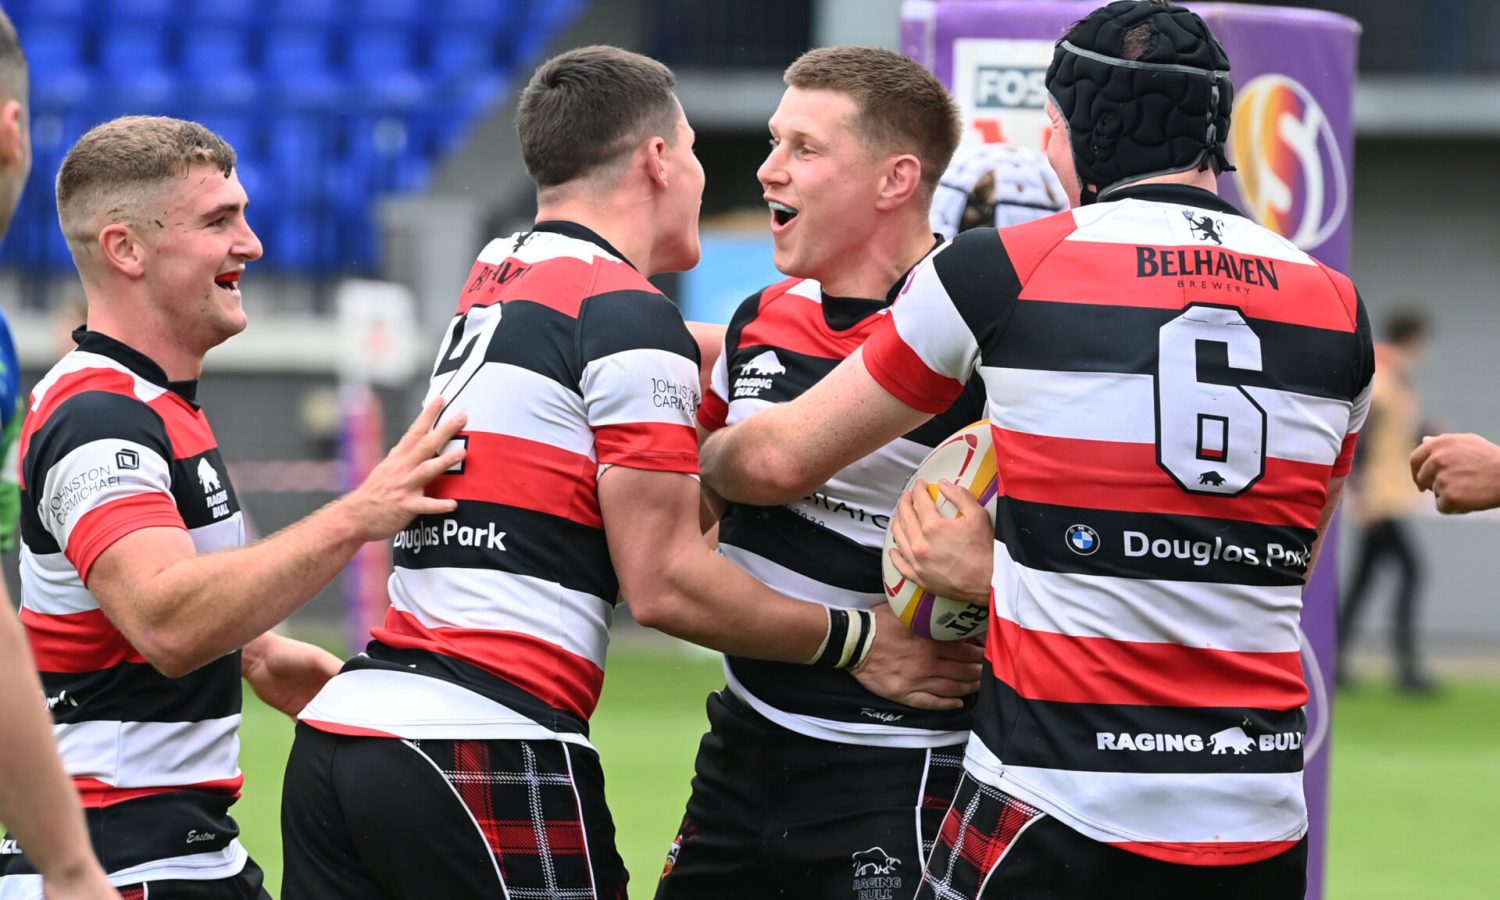 EDINBURGH, SCOTLAND - AUGUST 29: Stirling County's Archie Russell (centre) celebrates his try during a Super 6 match between Boroughmuir Bears and Stirling County at Meggatland, on August 29, 2021, in Edinburgh, Scotland (Photo by Paul Devlin / SNS Group)?